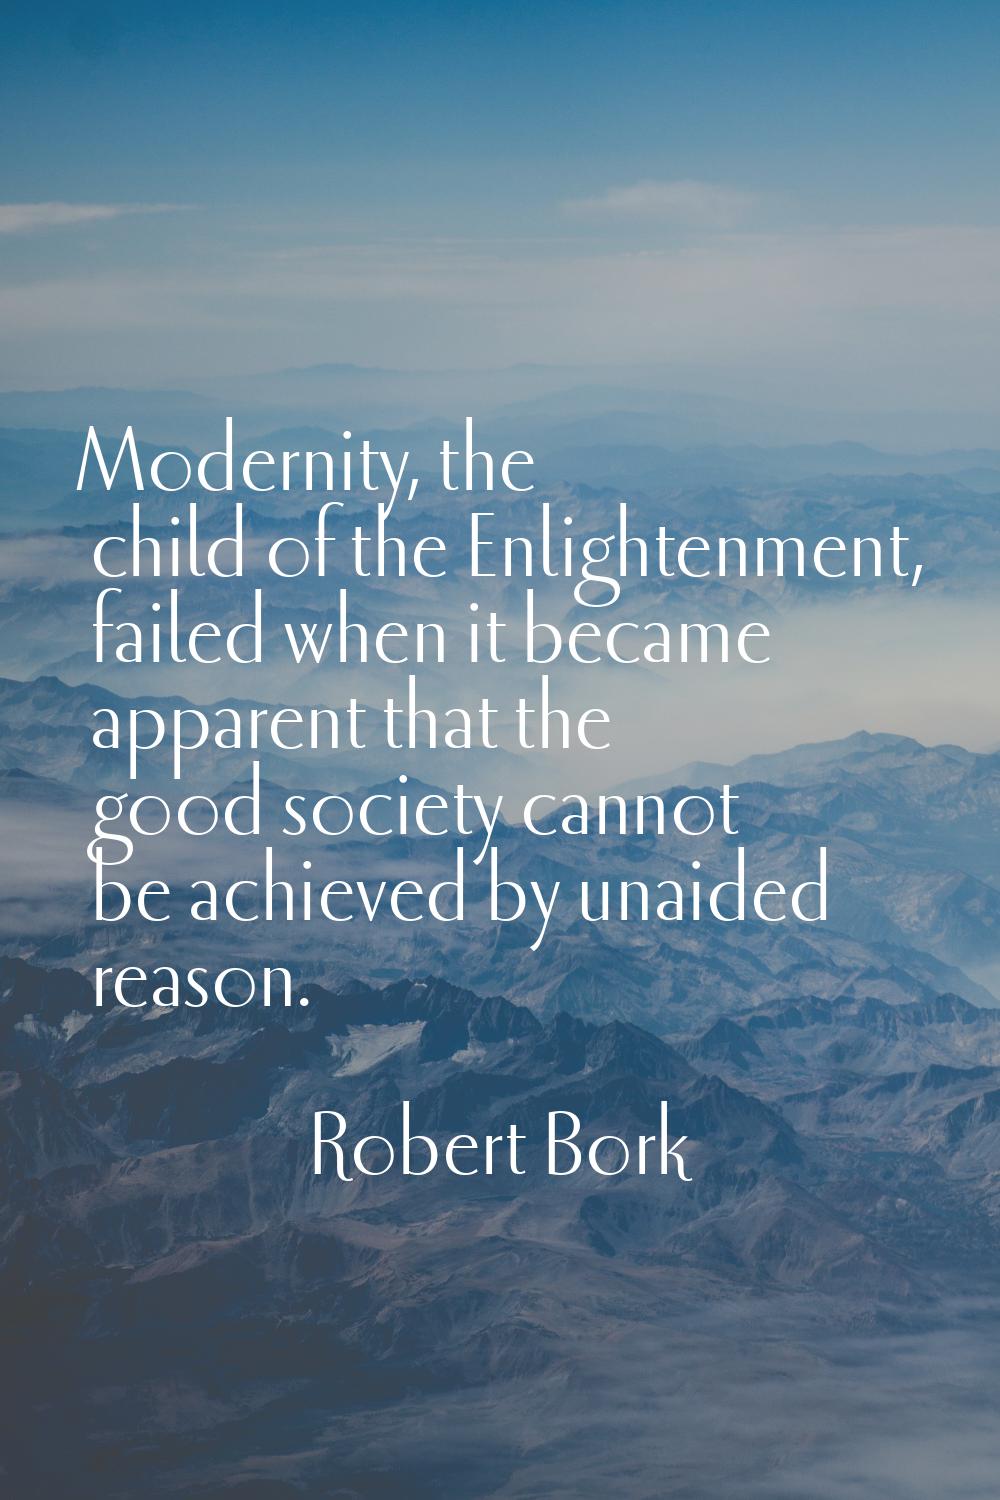 Modernity, the child of the Enlightenment, failed when it became apparent that the good society can